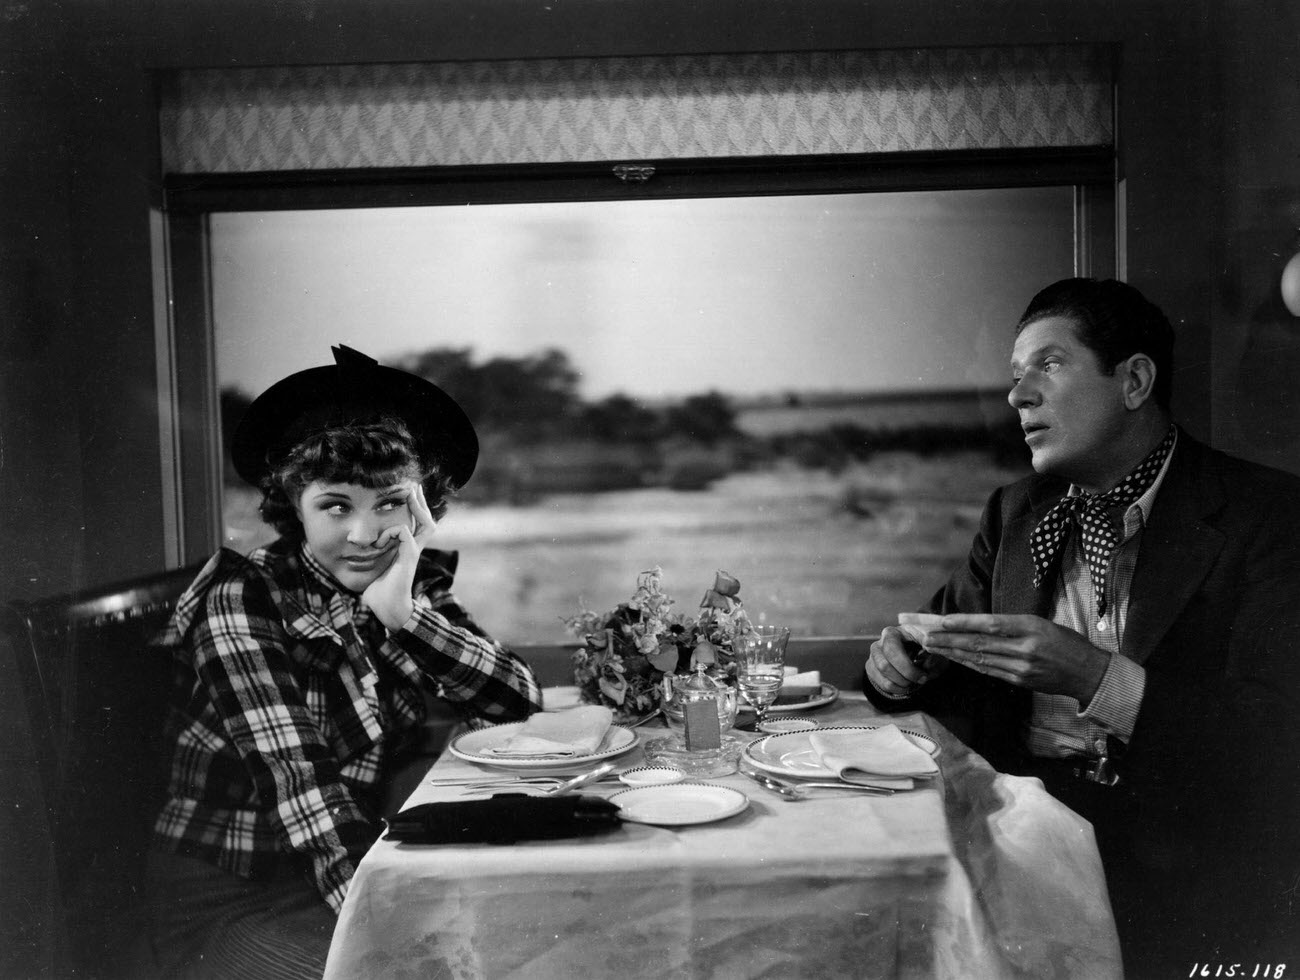 American comedian Bob Burns shares a meal with comedienne and vocalist Martha Raye in the dining car of a train